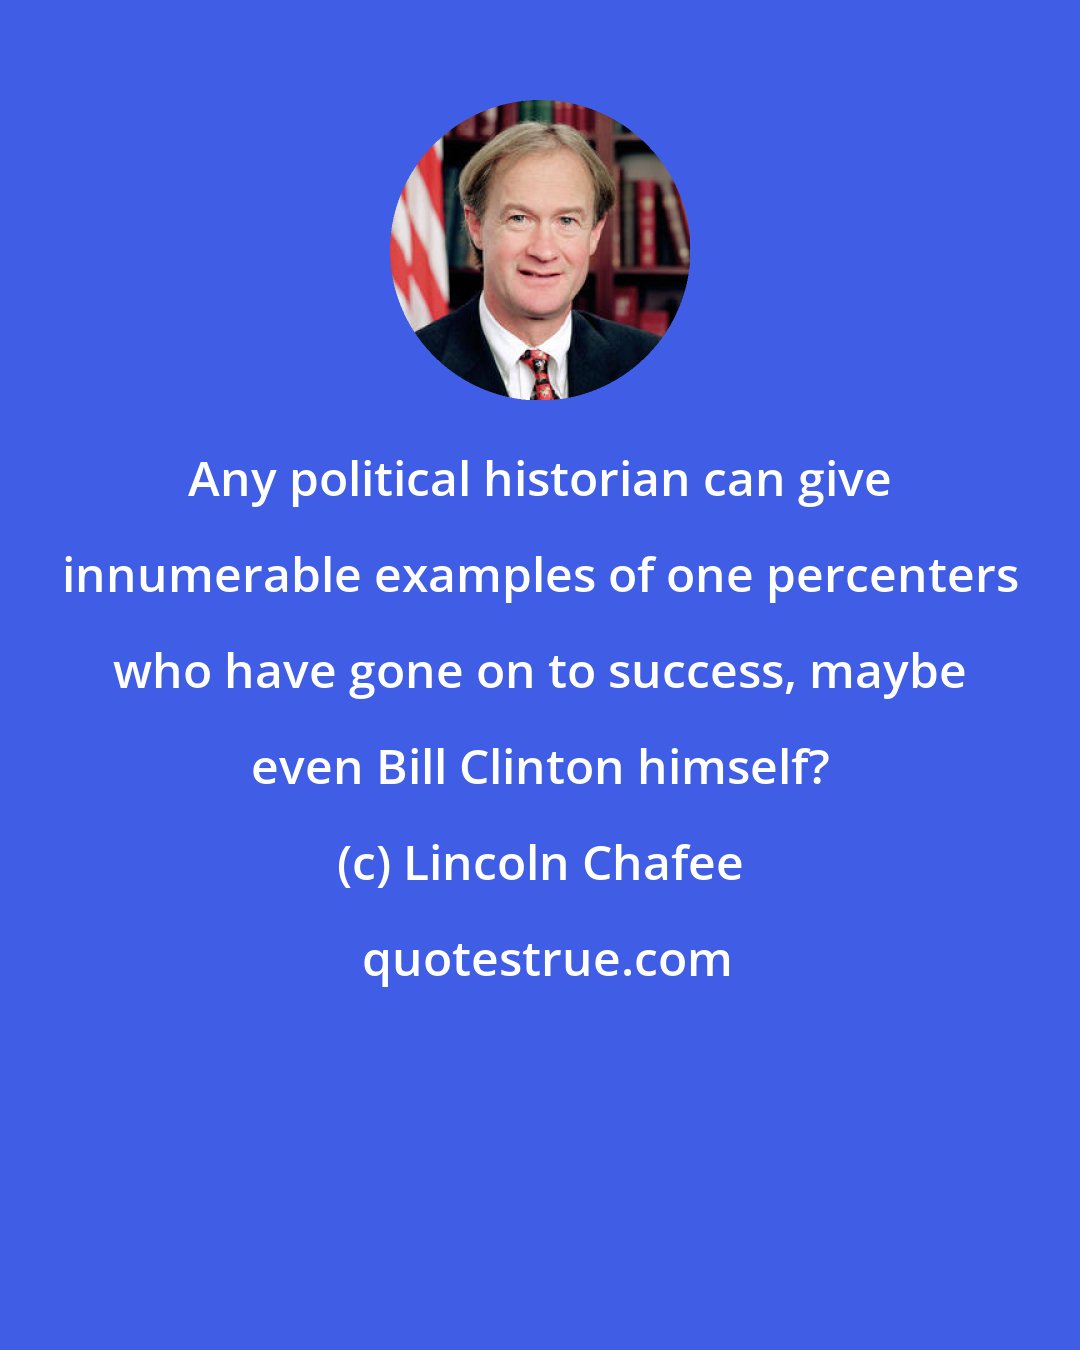 Lincoln Chafee: Any political historian can give innumerable examples of one percenters who have gone on to success, maybe even Bill Clinton himself?